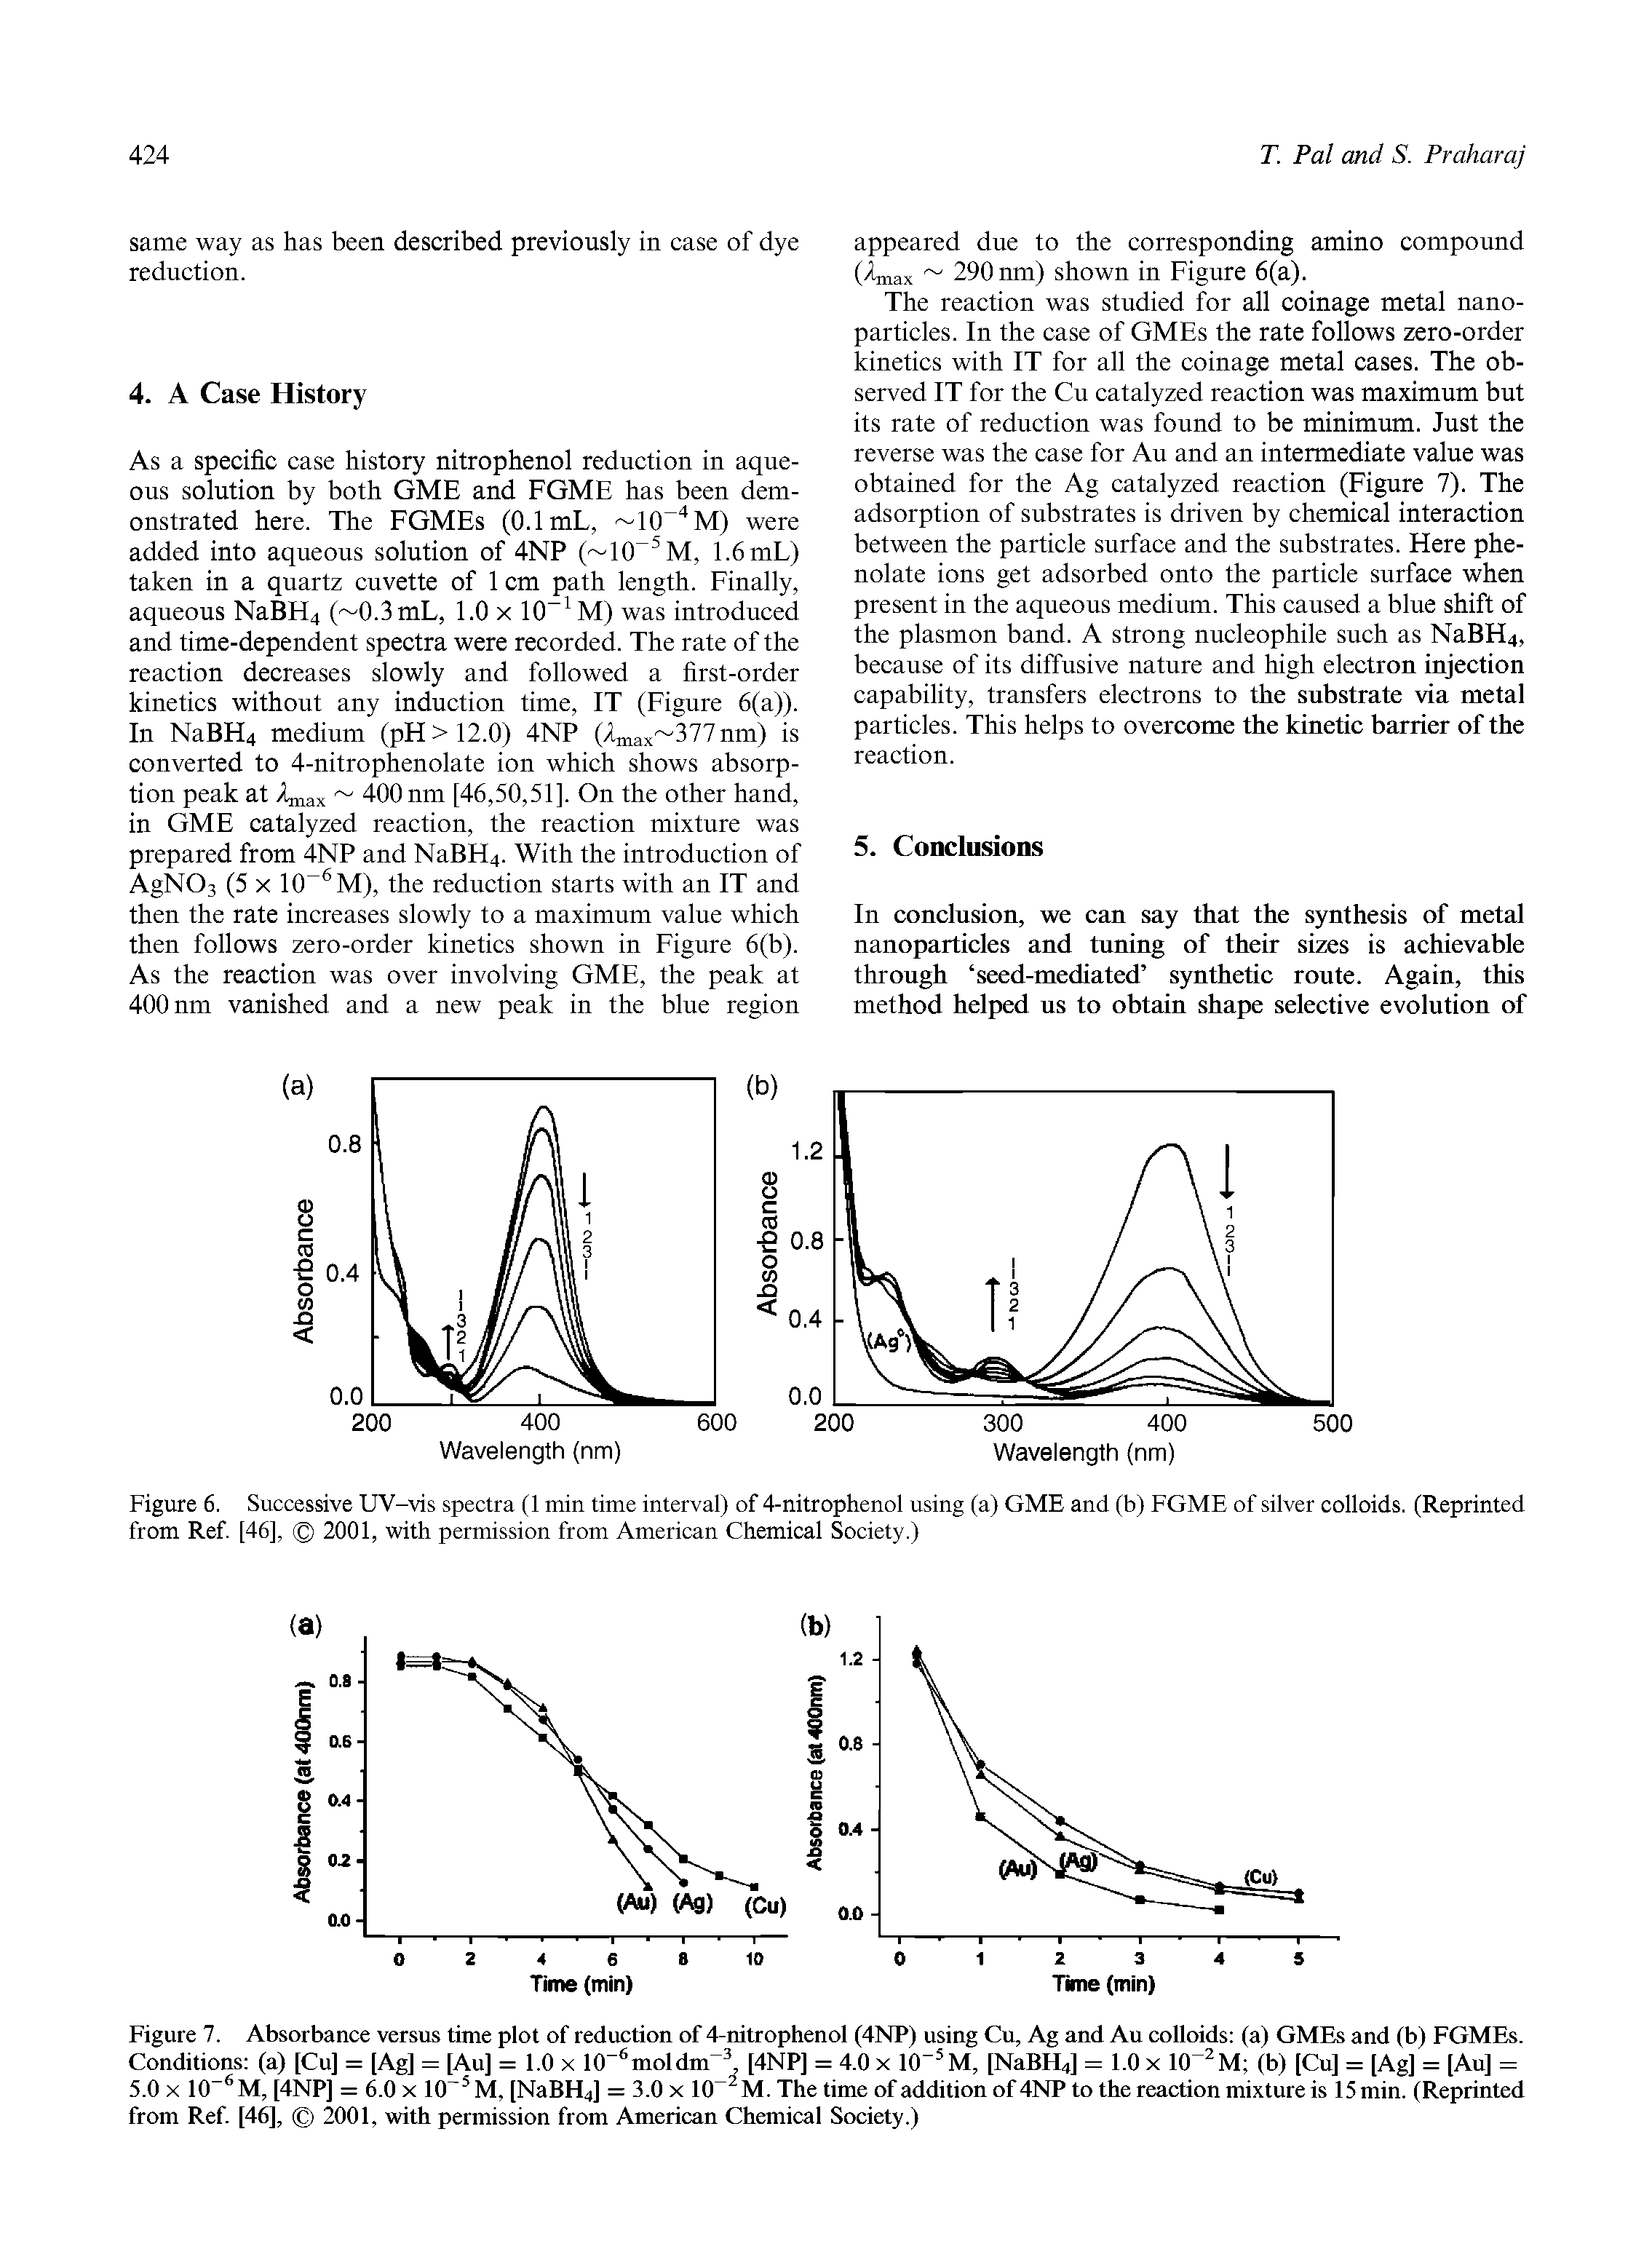 Figure 6. Successive UV-vis spectra (1 min time interval) of 4-nitrophenol using (a) GME and (b) FGME of silver colloids. (Reprinted from Ref. [46], 2001, with permission from American Chemical Society.)...